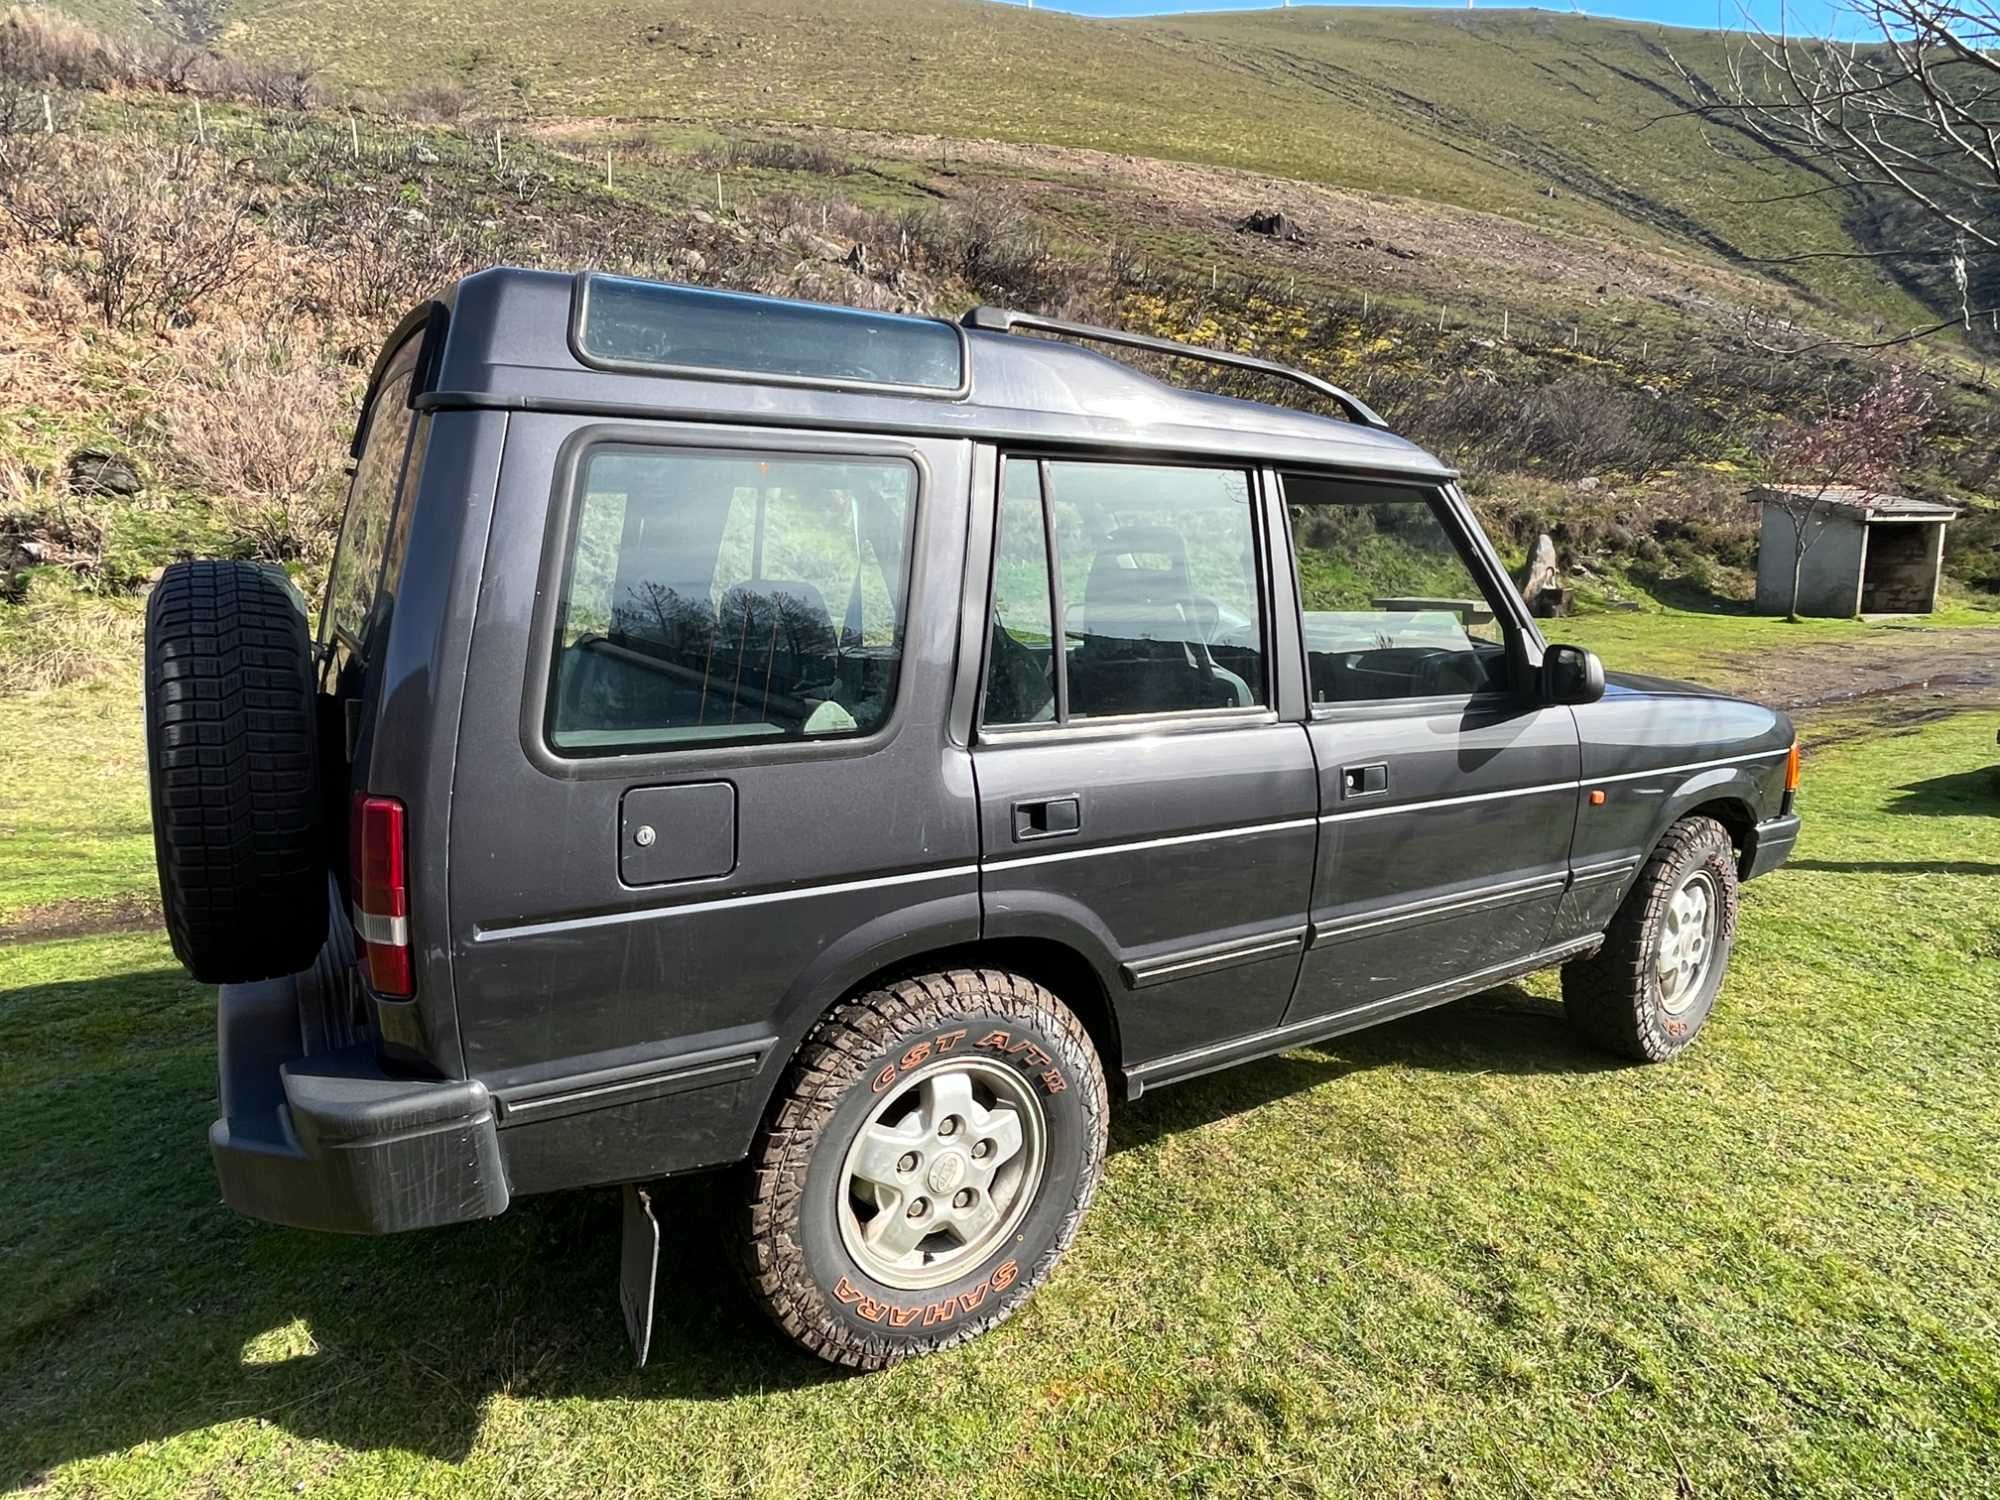 LandRover Discovery 300Tdi